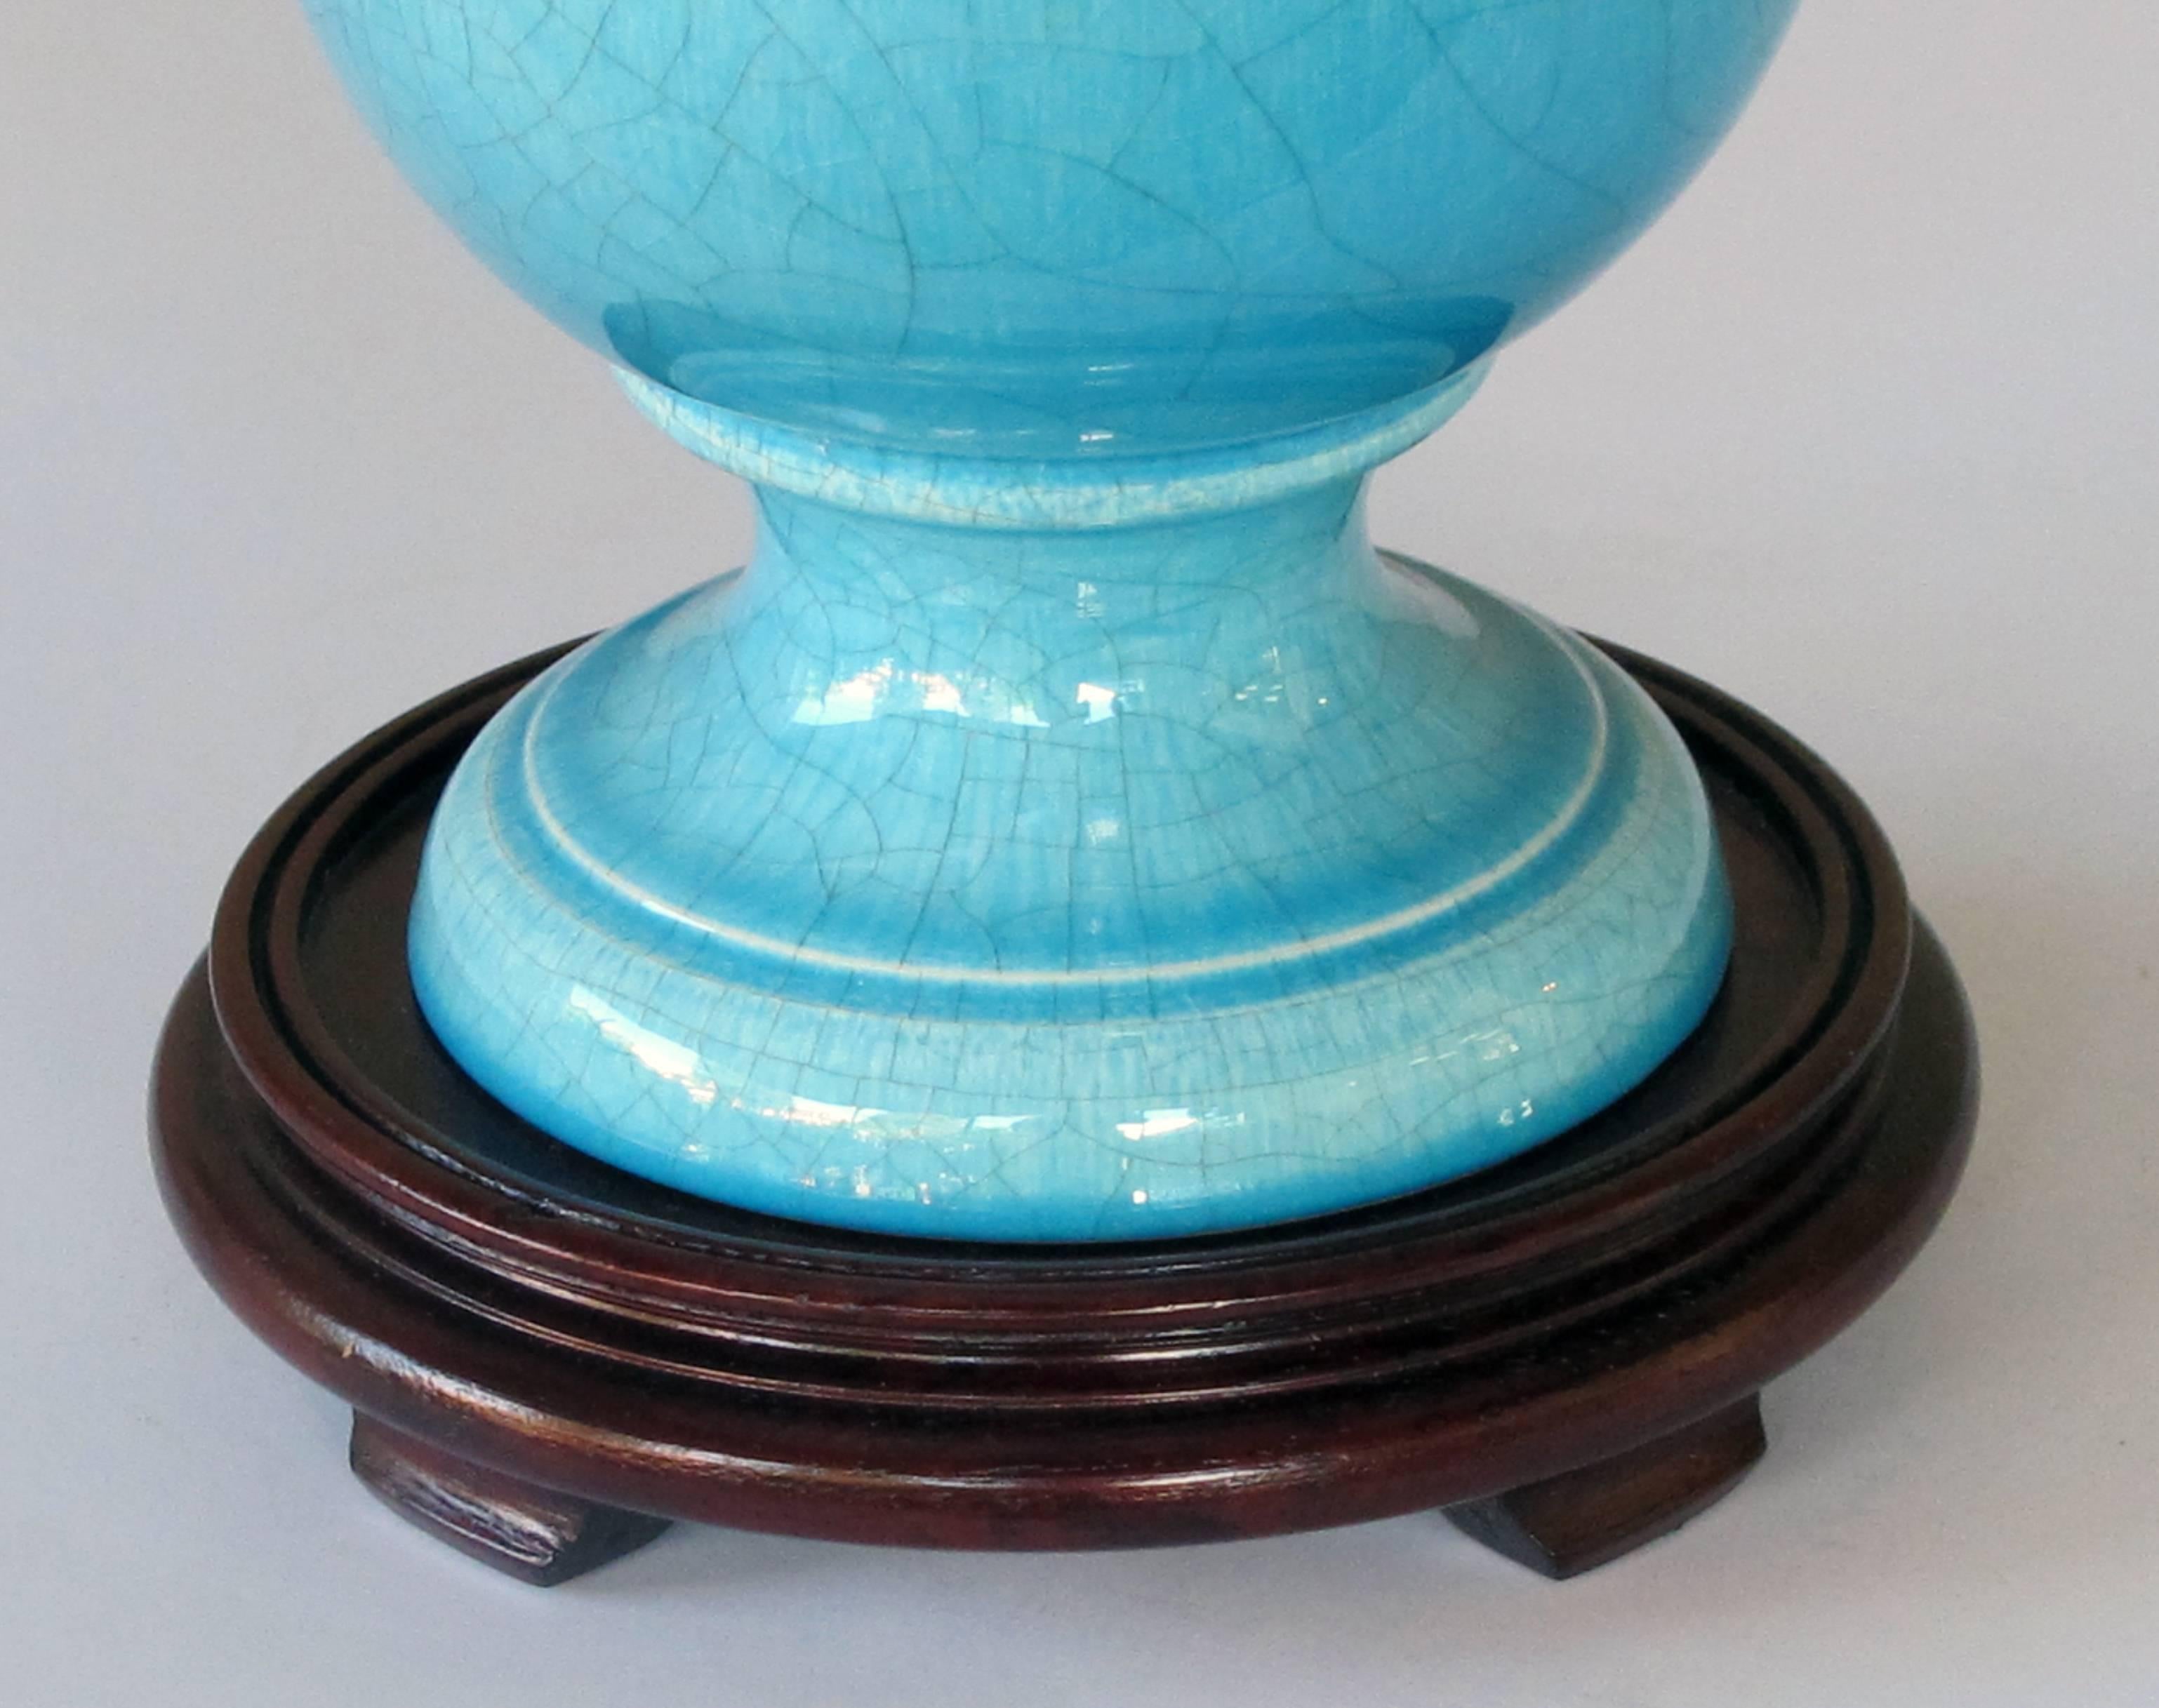 Striking Pair of French Art Deco Turquoise Crackle-Glazed Urns Now Lamps In Excellent Condition For Sale In San Francisco, CA